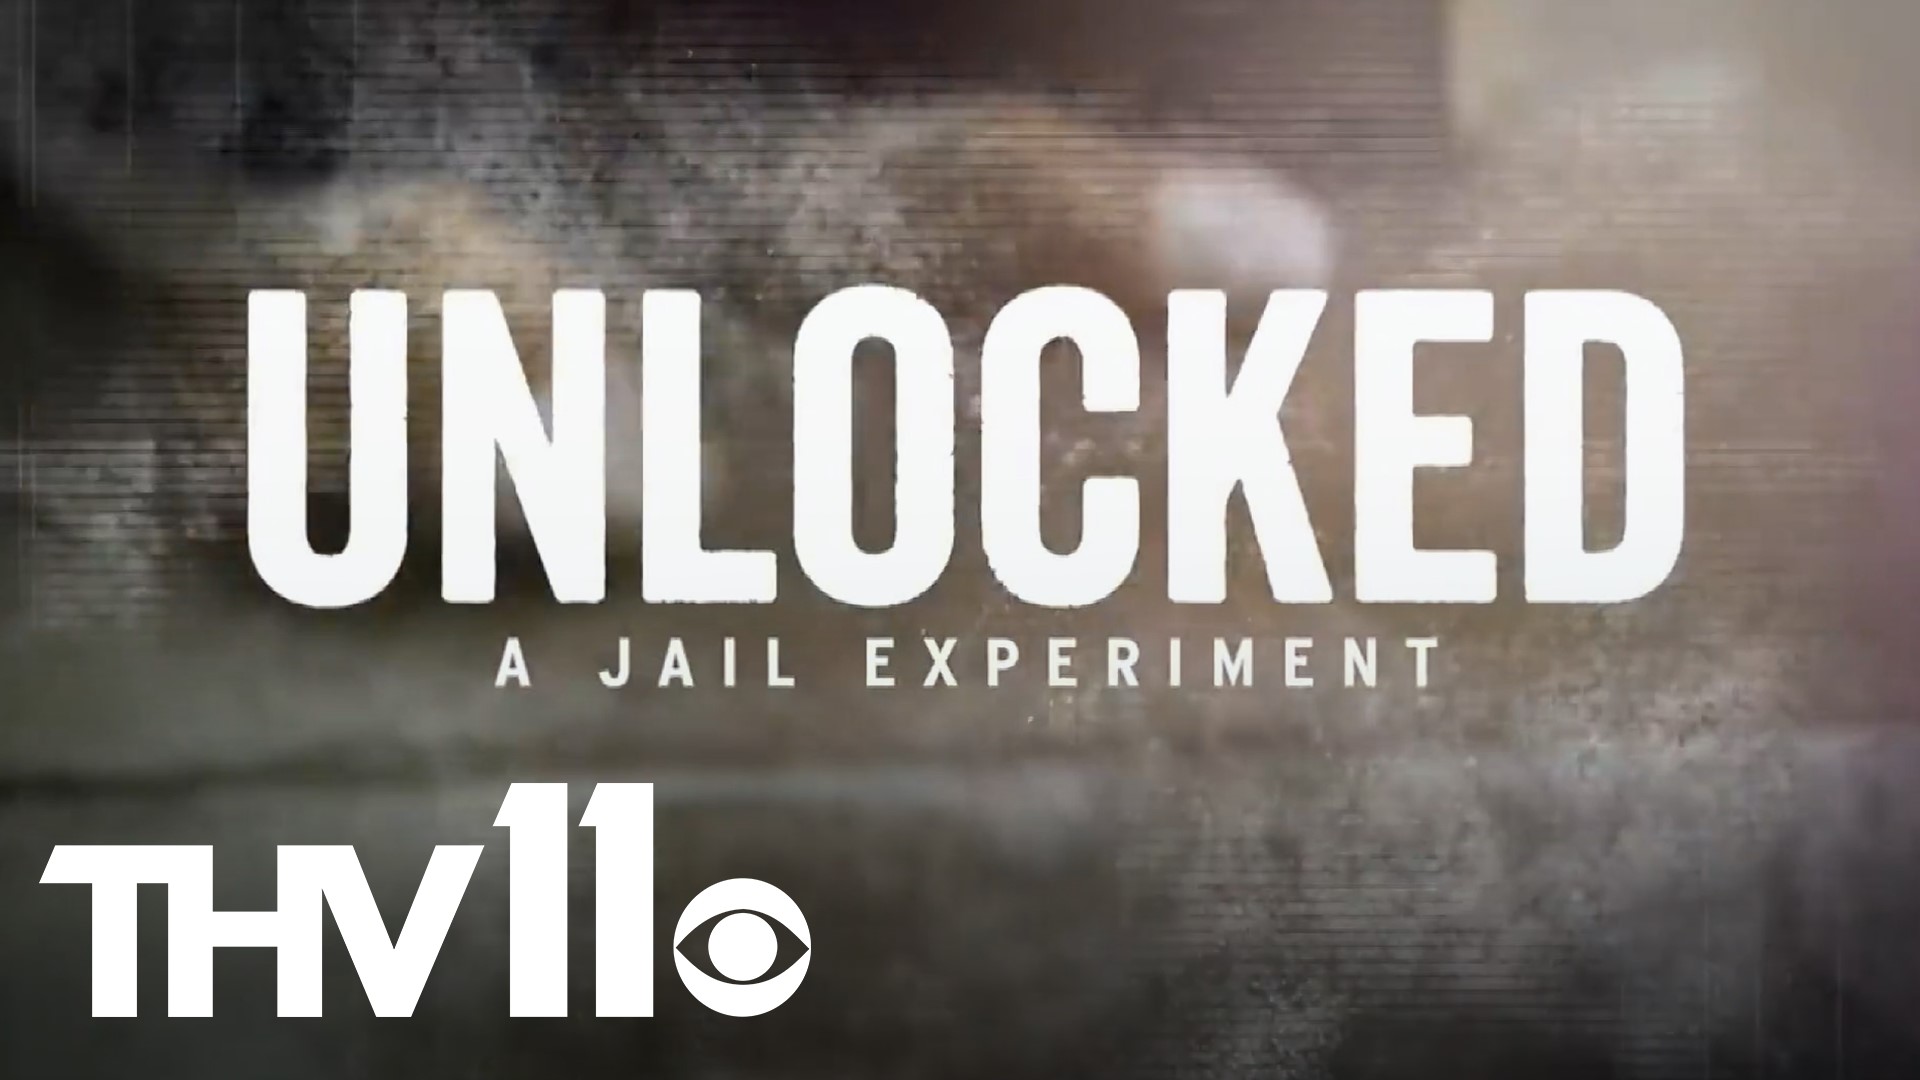 A new Netflix series about an experiment with the Pulaski County jail is creating a lot of conversation in Arkansas—but was the project even legal?